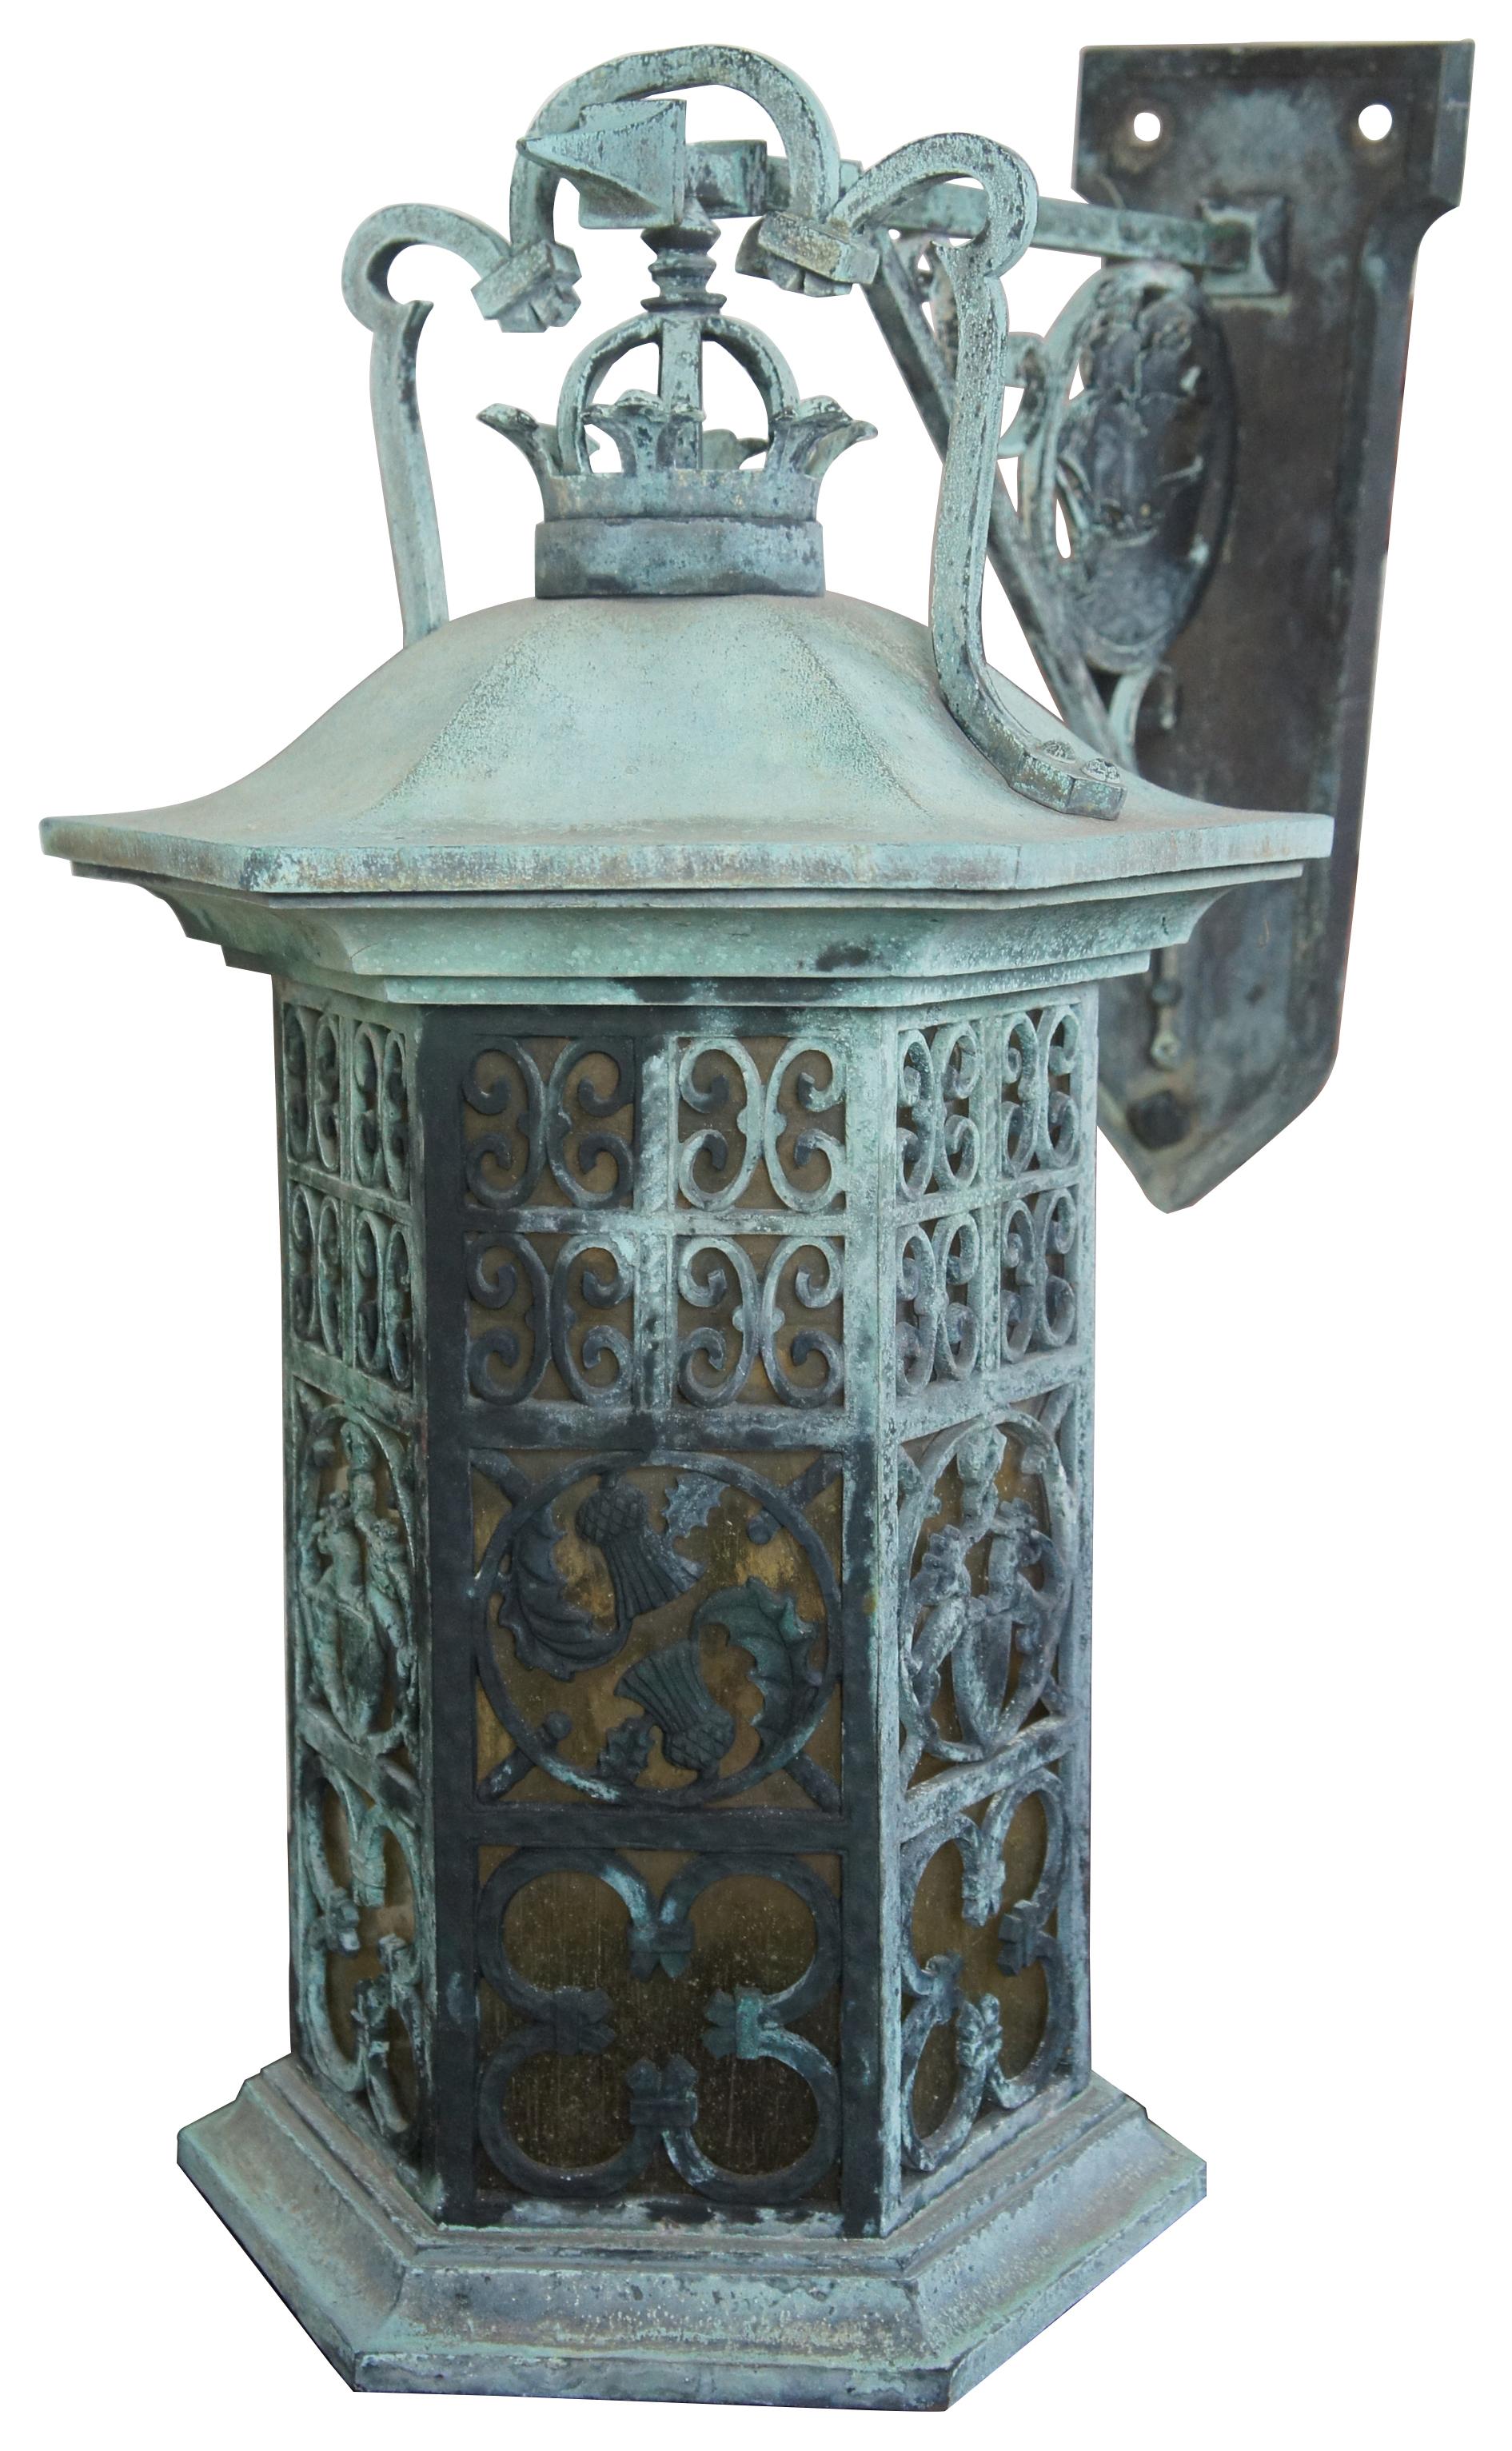 Iron lantern wall sconce. Features a nautical theme with a ship on the wall plaque or crane and heraldic coat of arms, thistles and ornate detail on the lantern. This piece comes from one of the first homes built in oakwood, Ohio by Harry I